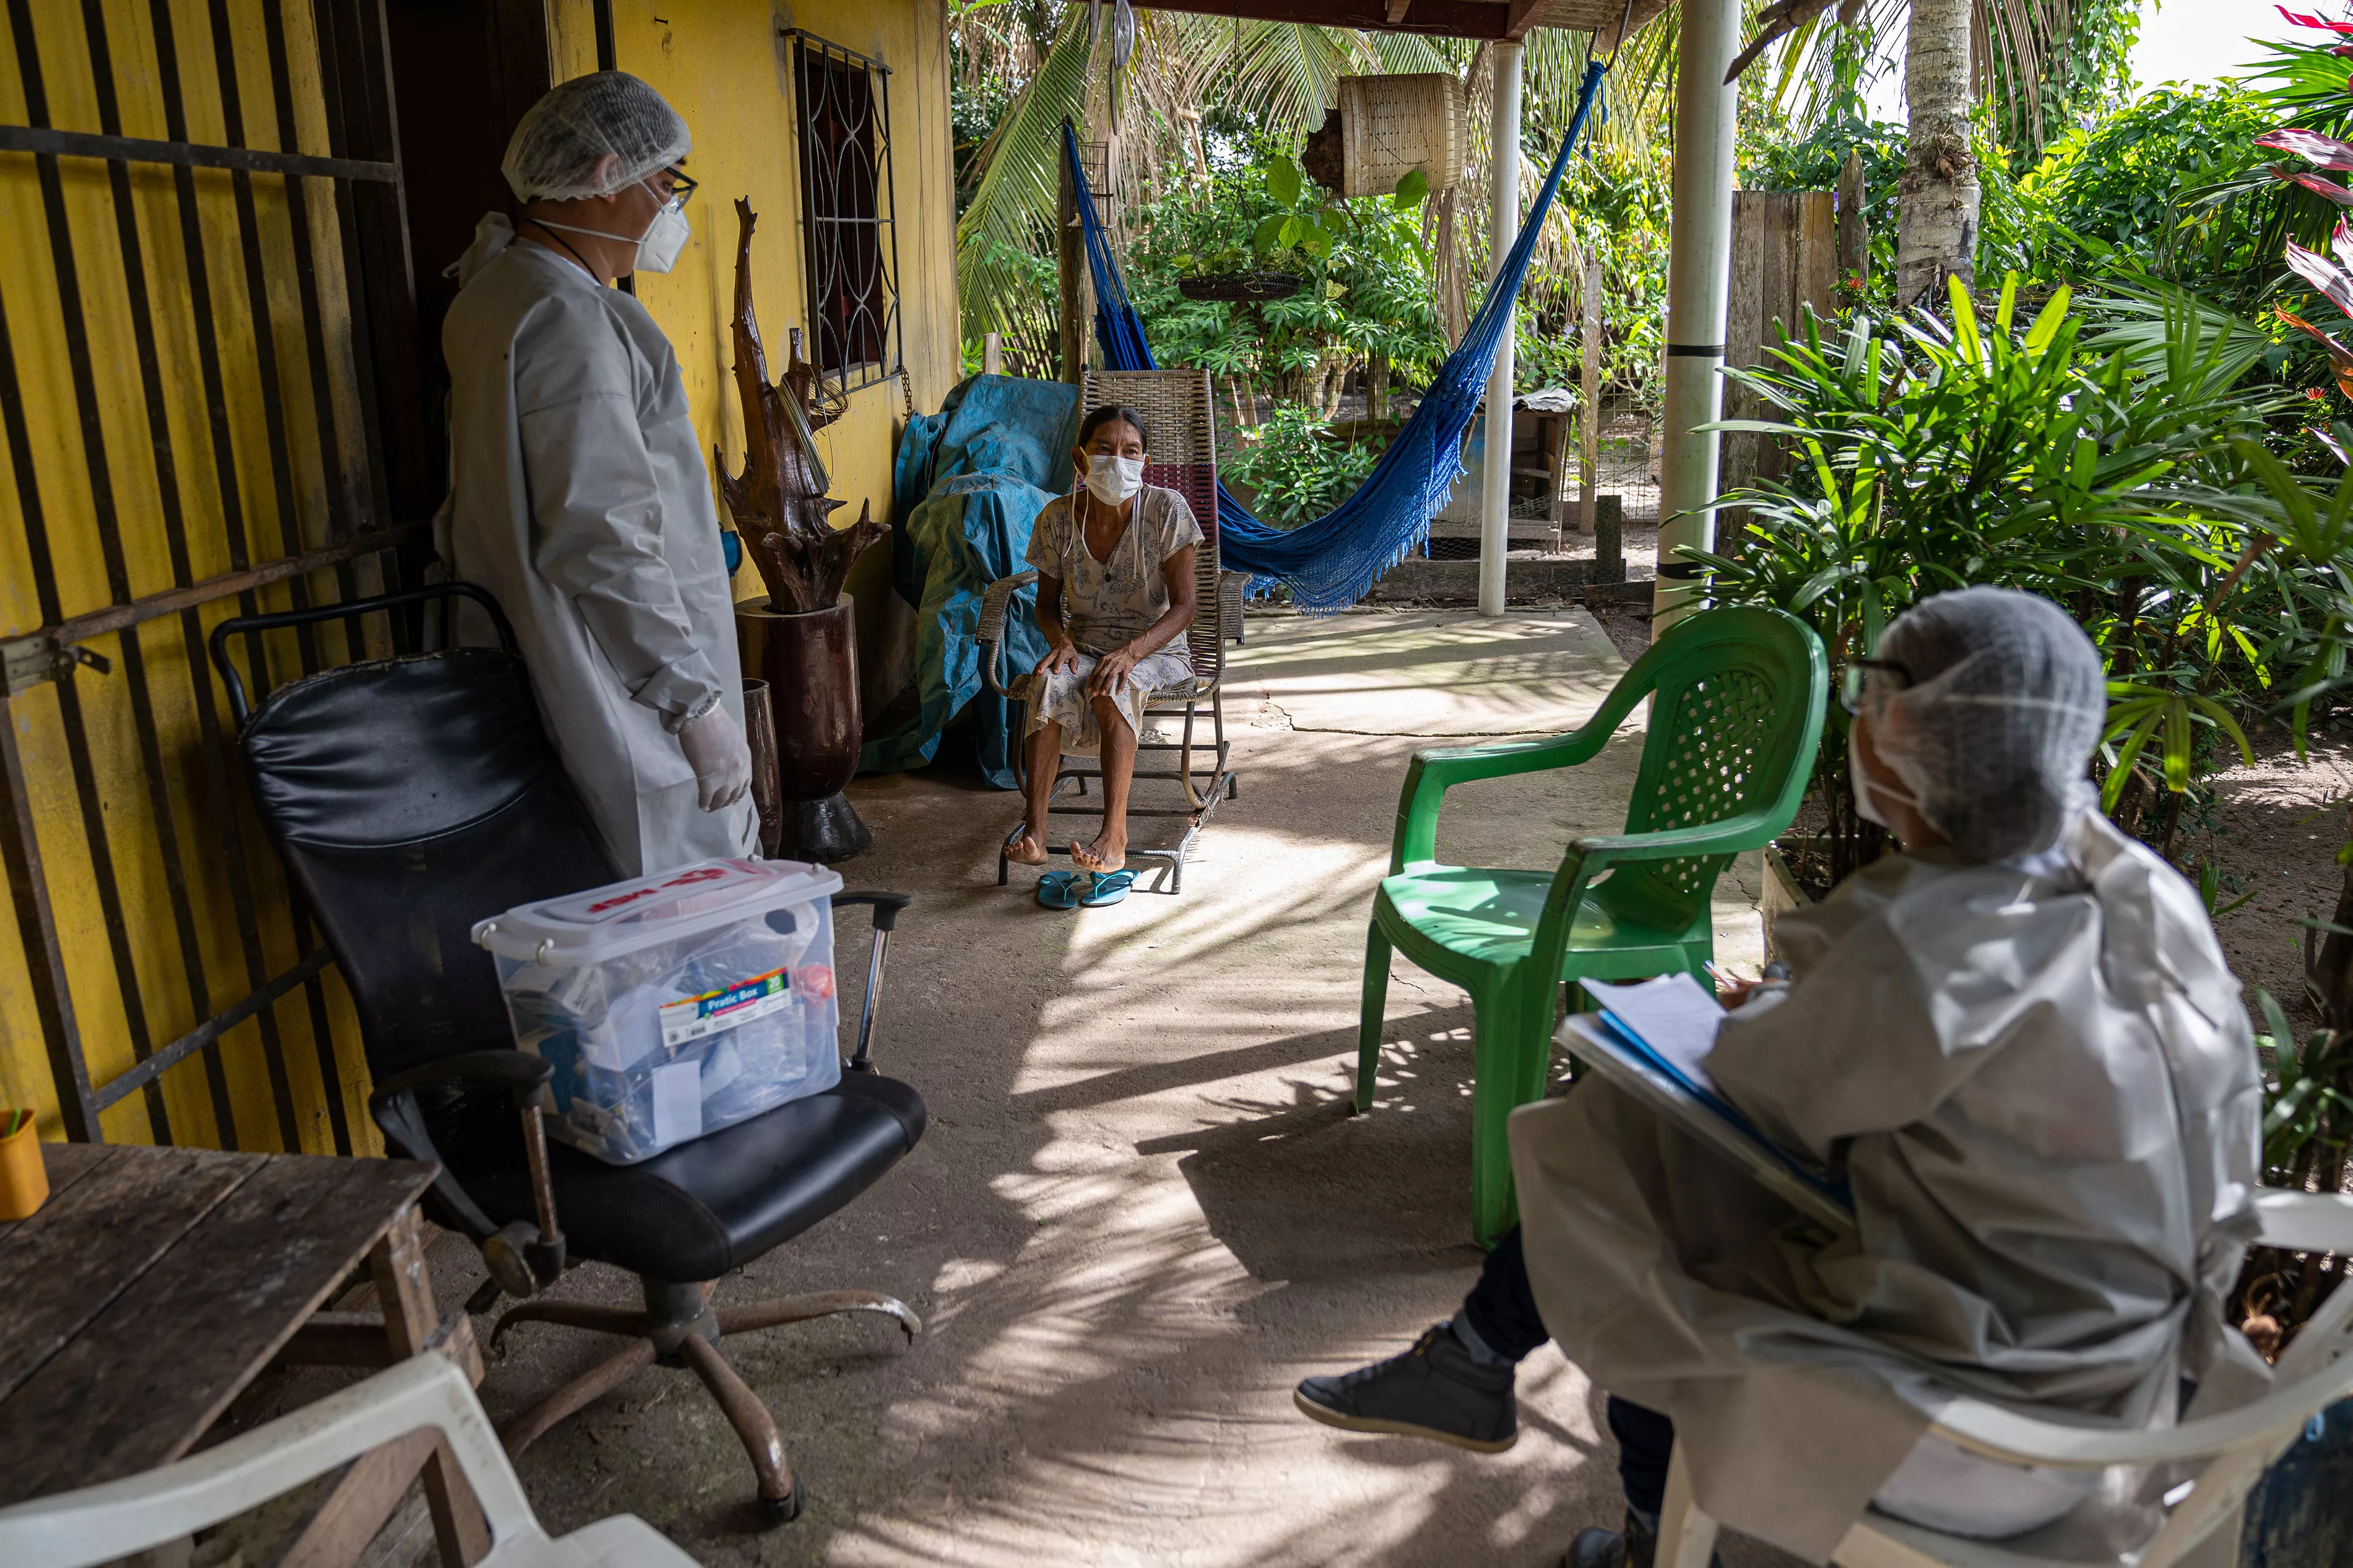 The MSF mobile clinic team visited post-discharge cases and patients in isolation in their home.